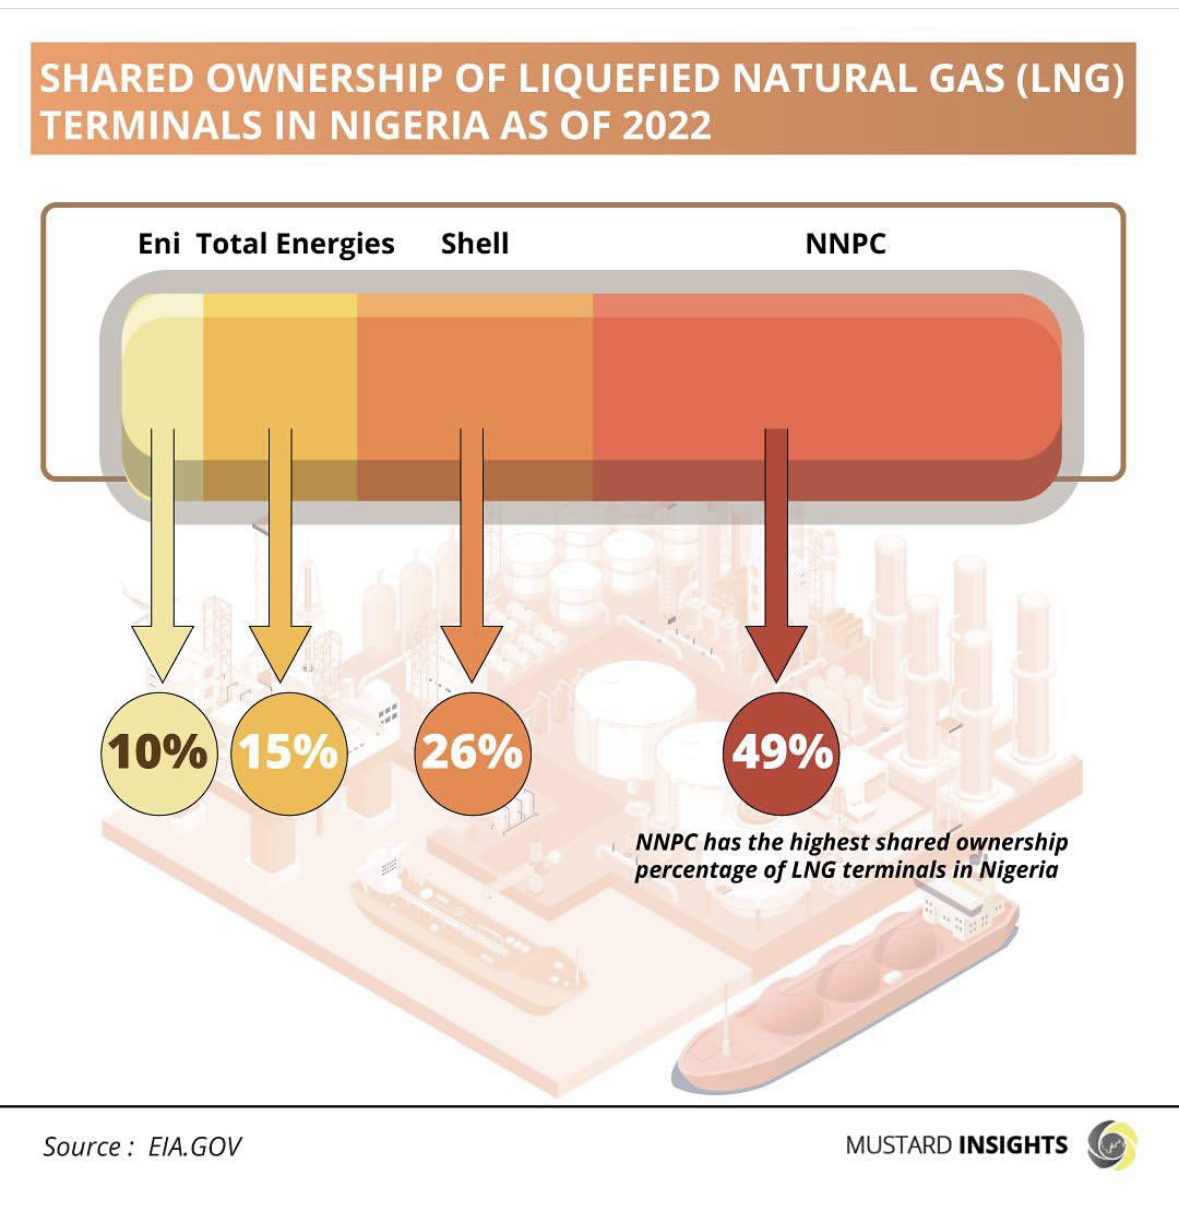 Shared Ownership Of Liquefied Natural Gas (LNG) Terminals In Nigeria As Of 2022